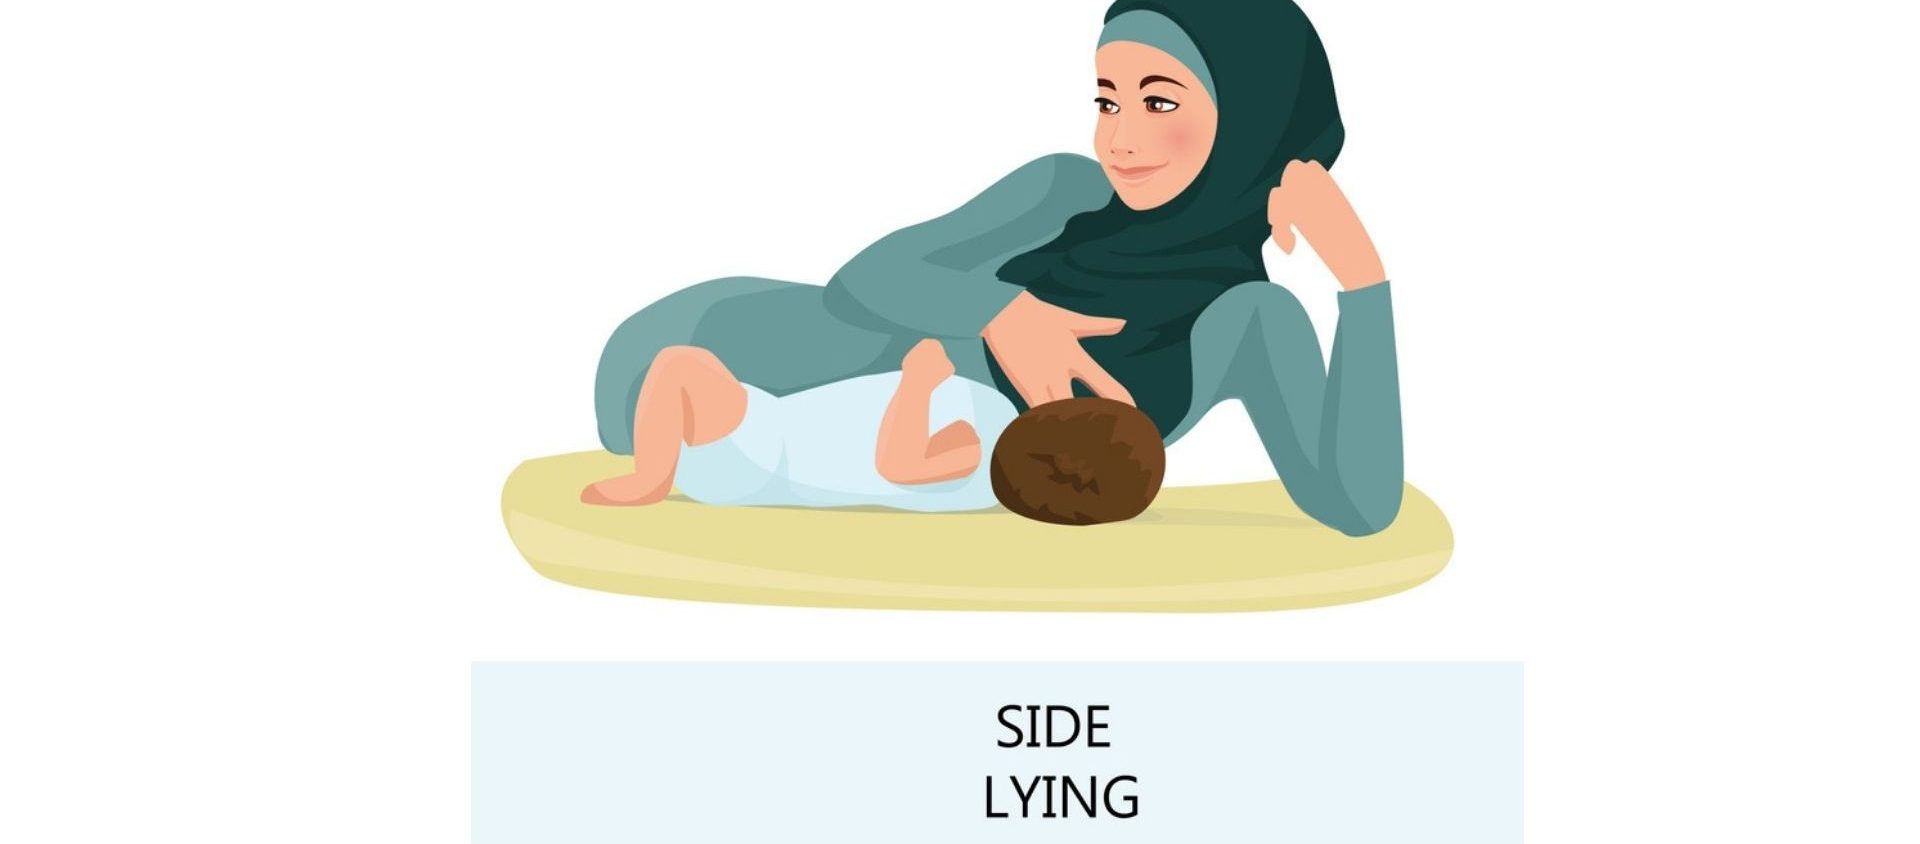 an infographic showing breastfeeding position three - a woman lying on her side